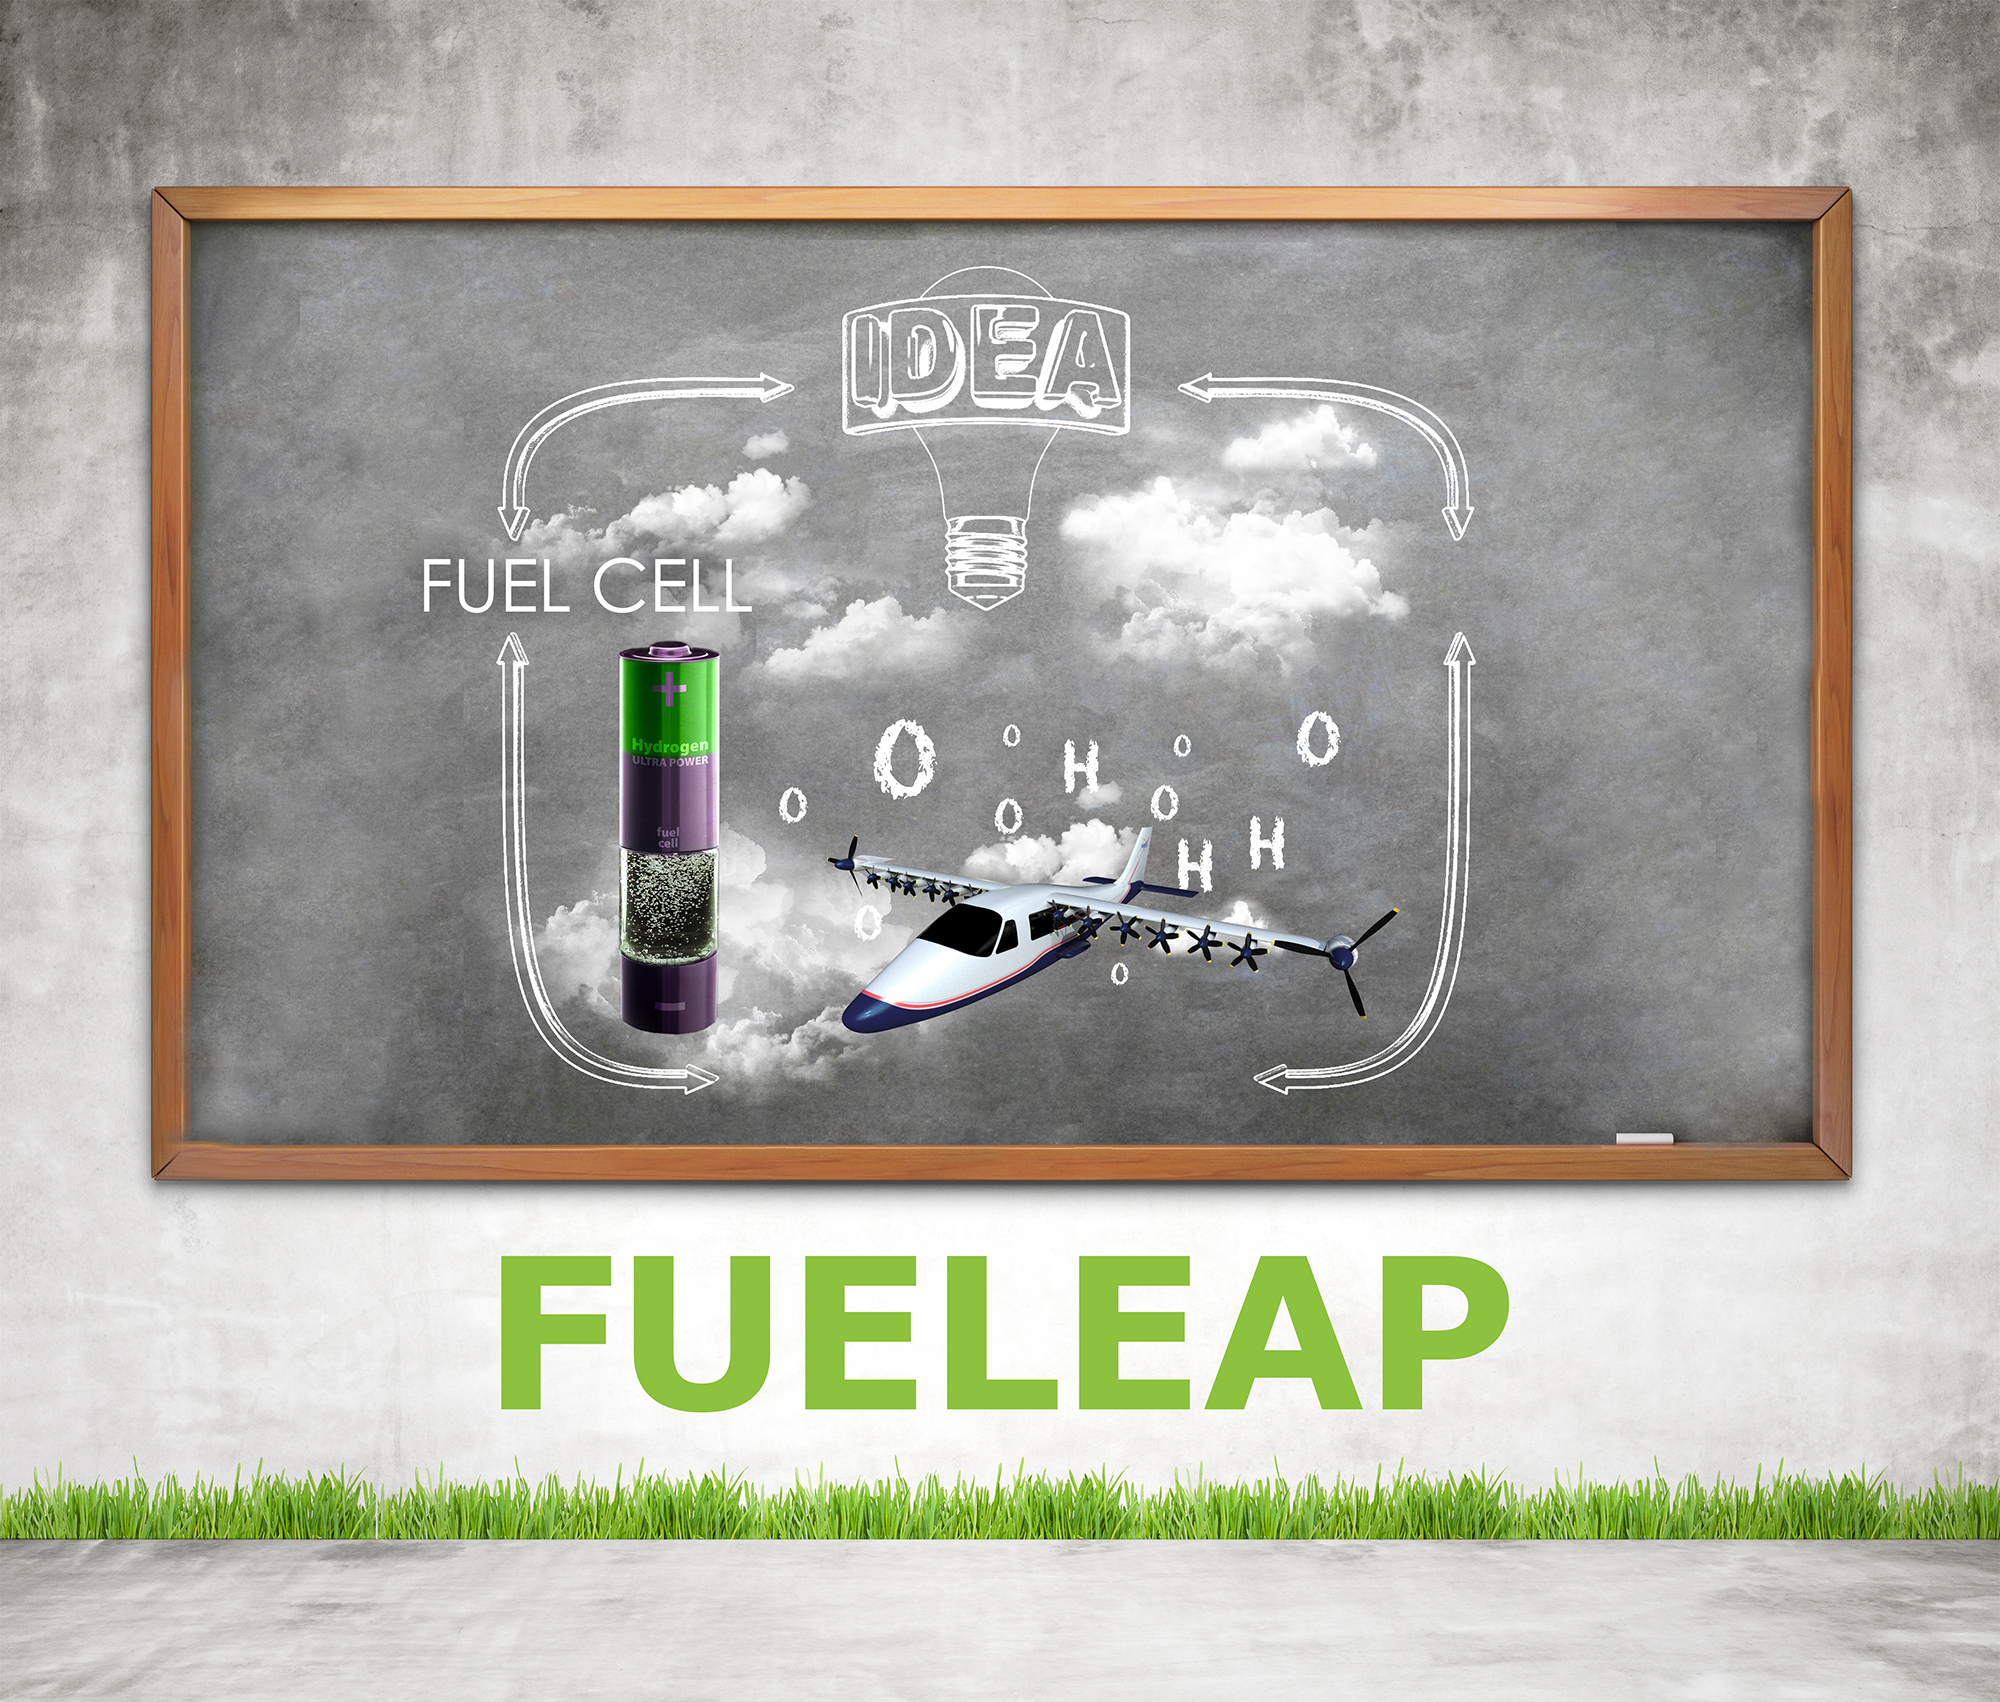 Artist concept of a chalk board showing fuel cell and an electric airplane with oxygen and hydrogen around it.